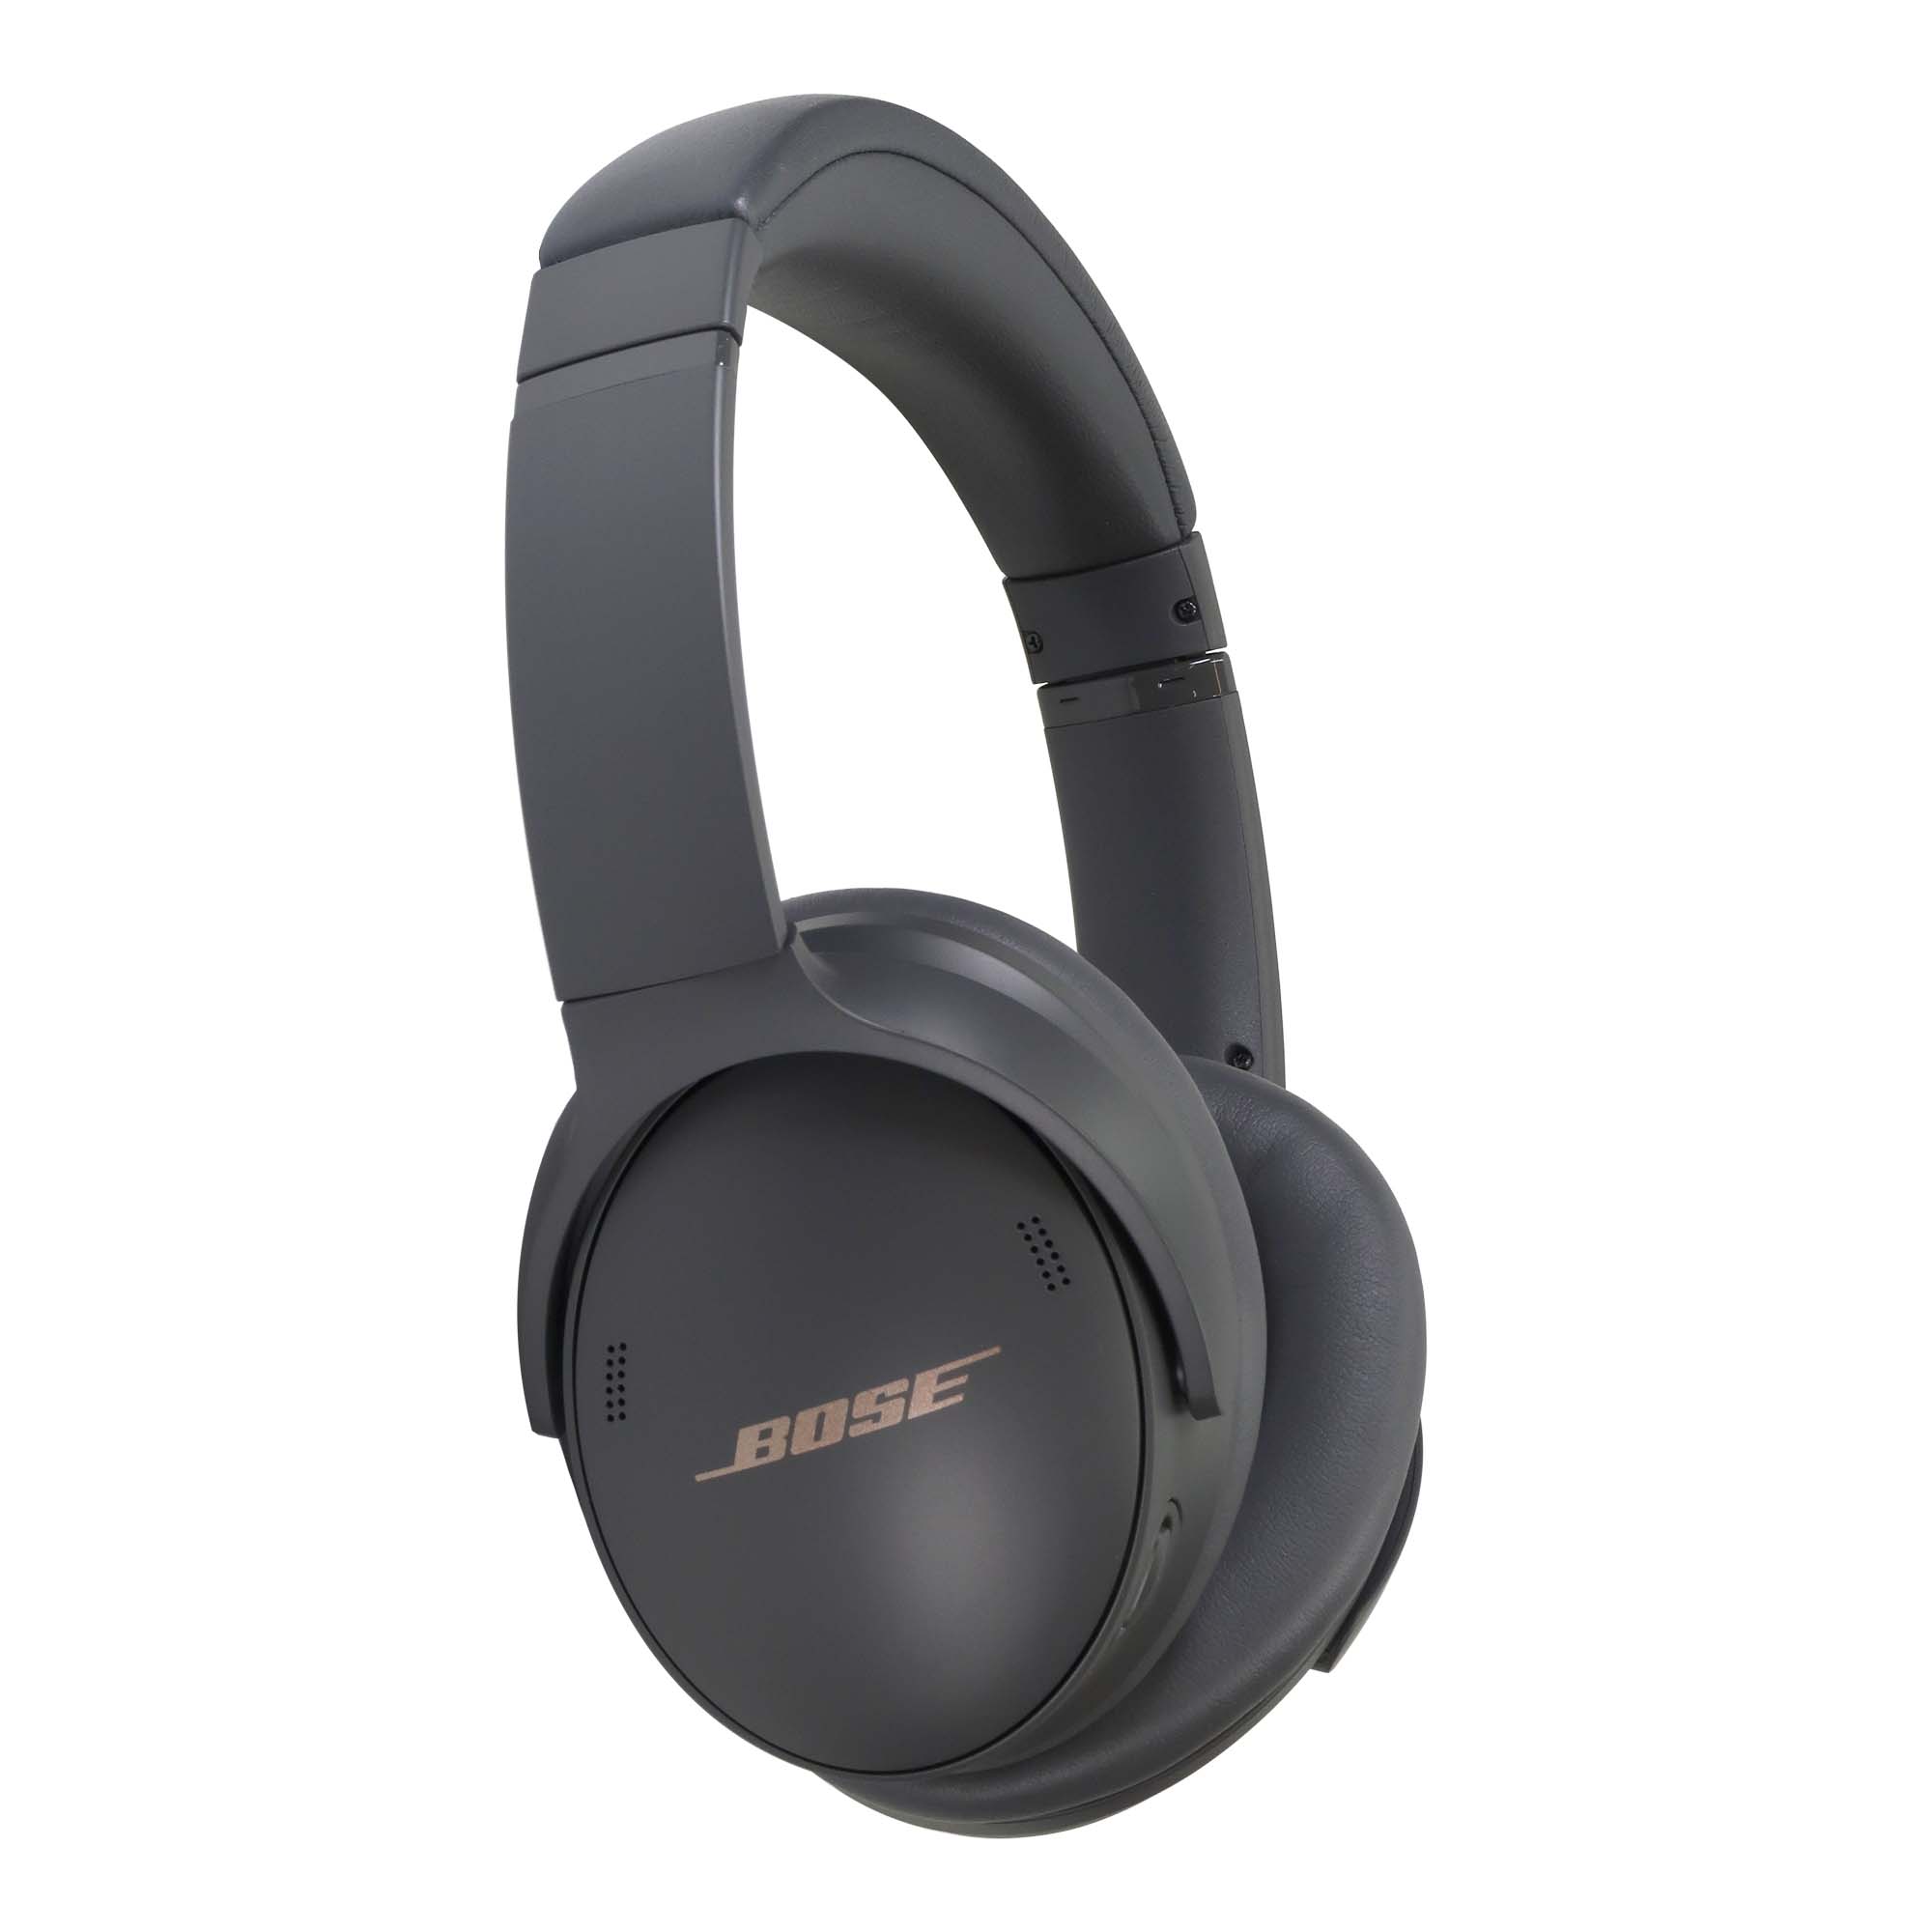 Bose QuietComfort 45 Noise-Canceling Wireless Over-Ear Headphones (Limited Edition, Eclipse Gray) and JBL T110 in Ear Headphones